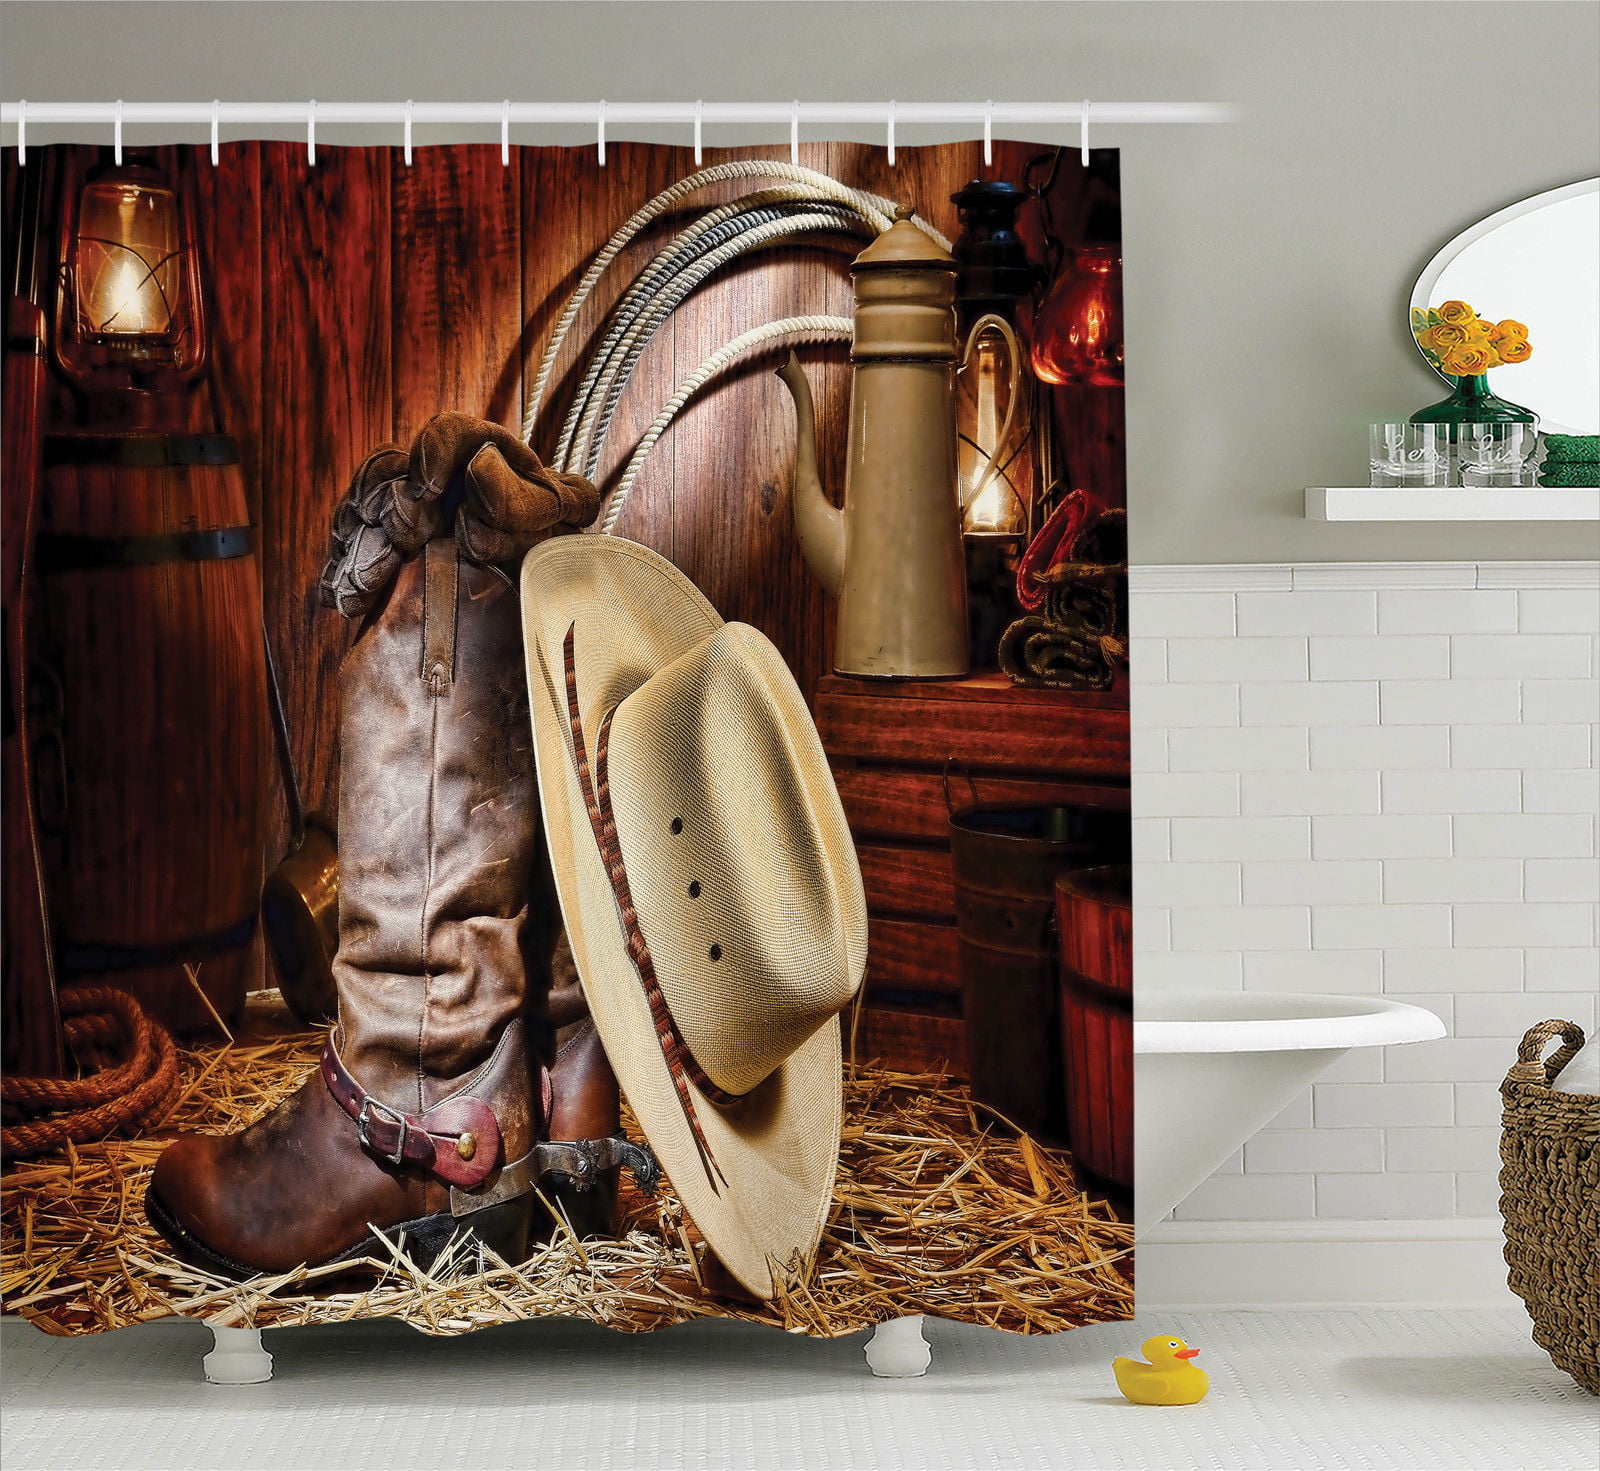 Wild West Cowboy Horse and Wooden House Bank Shower Curtain Set Bathroom Decor 